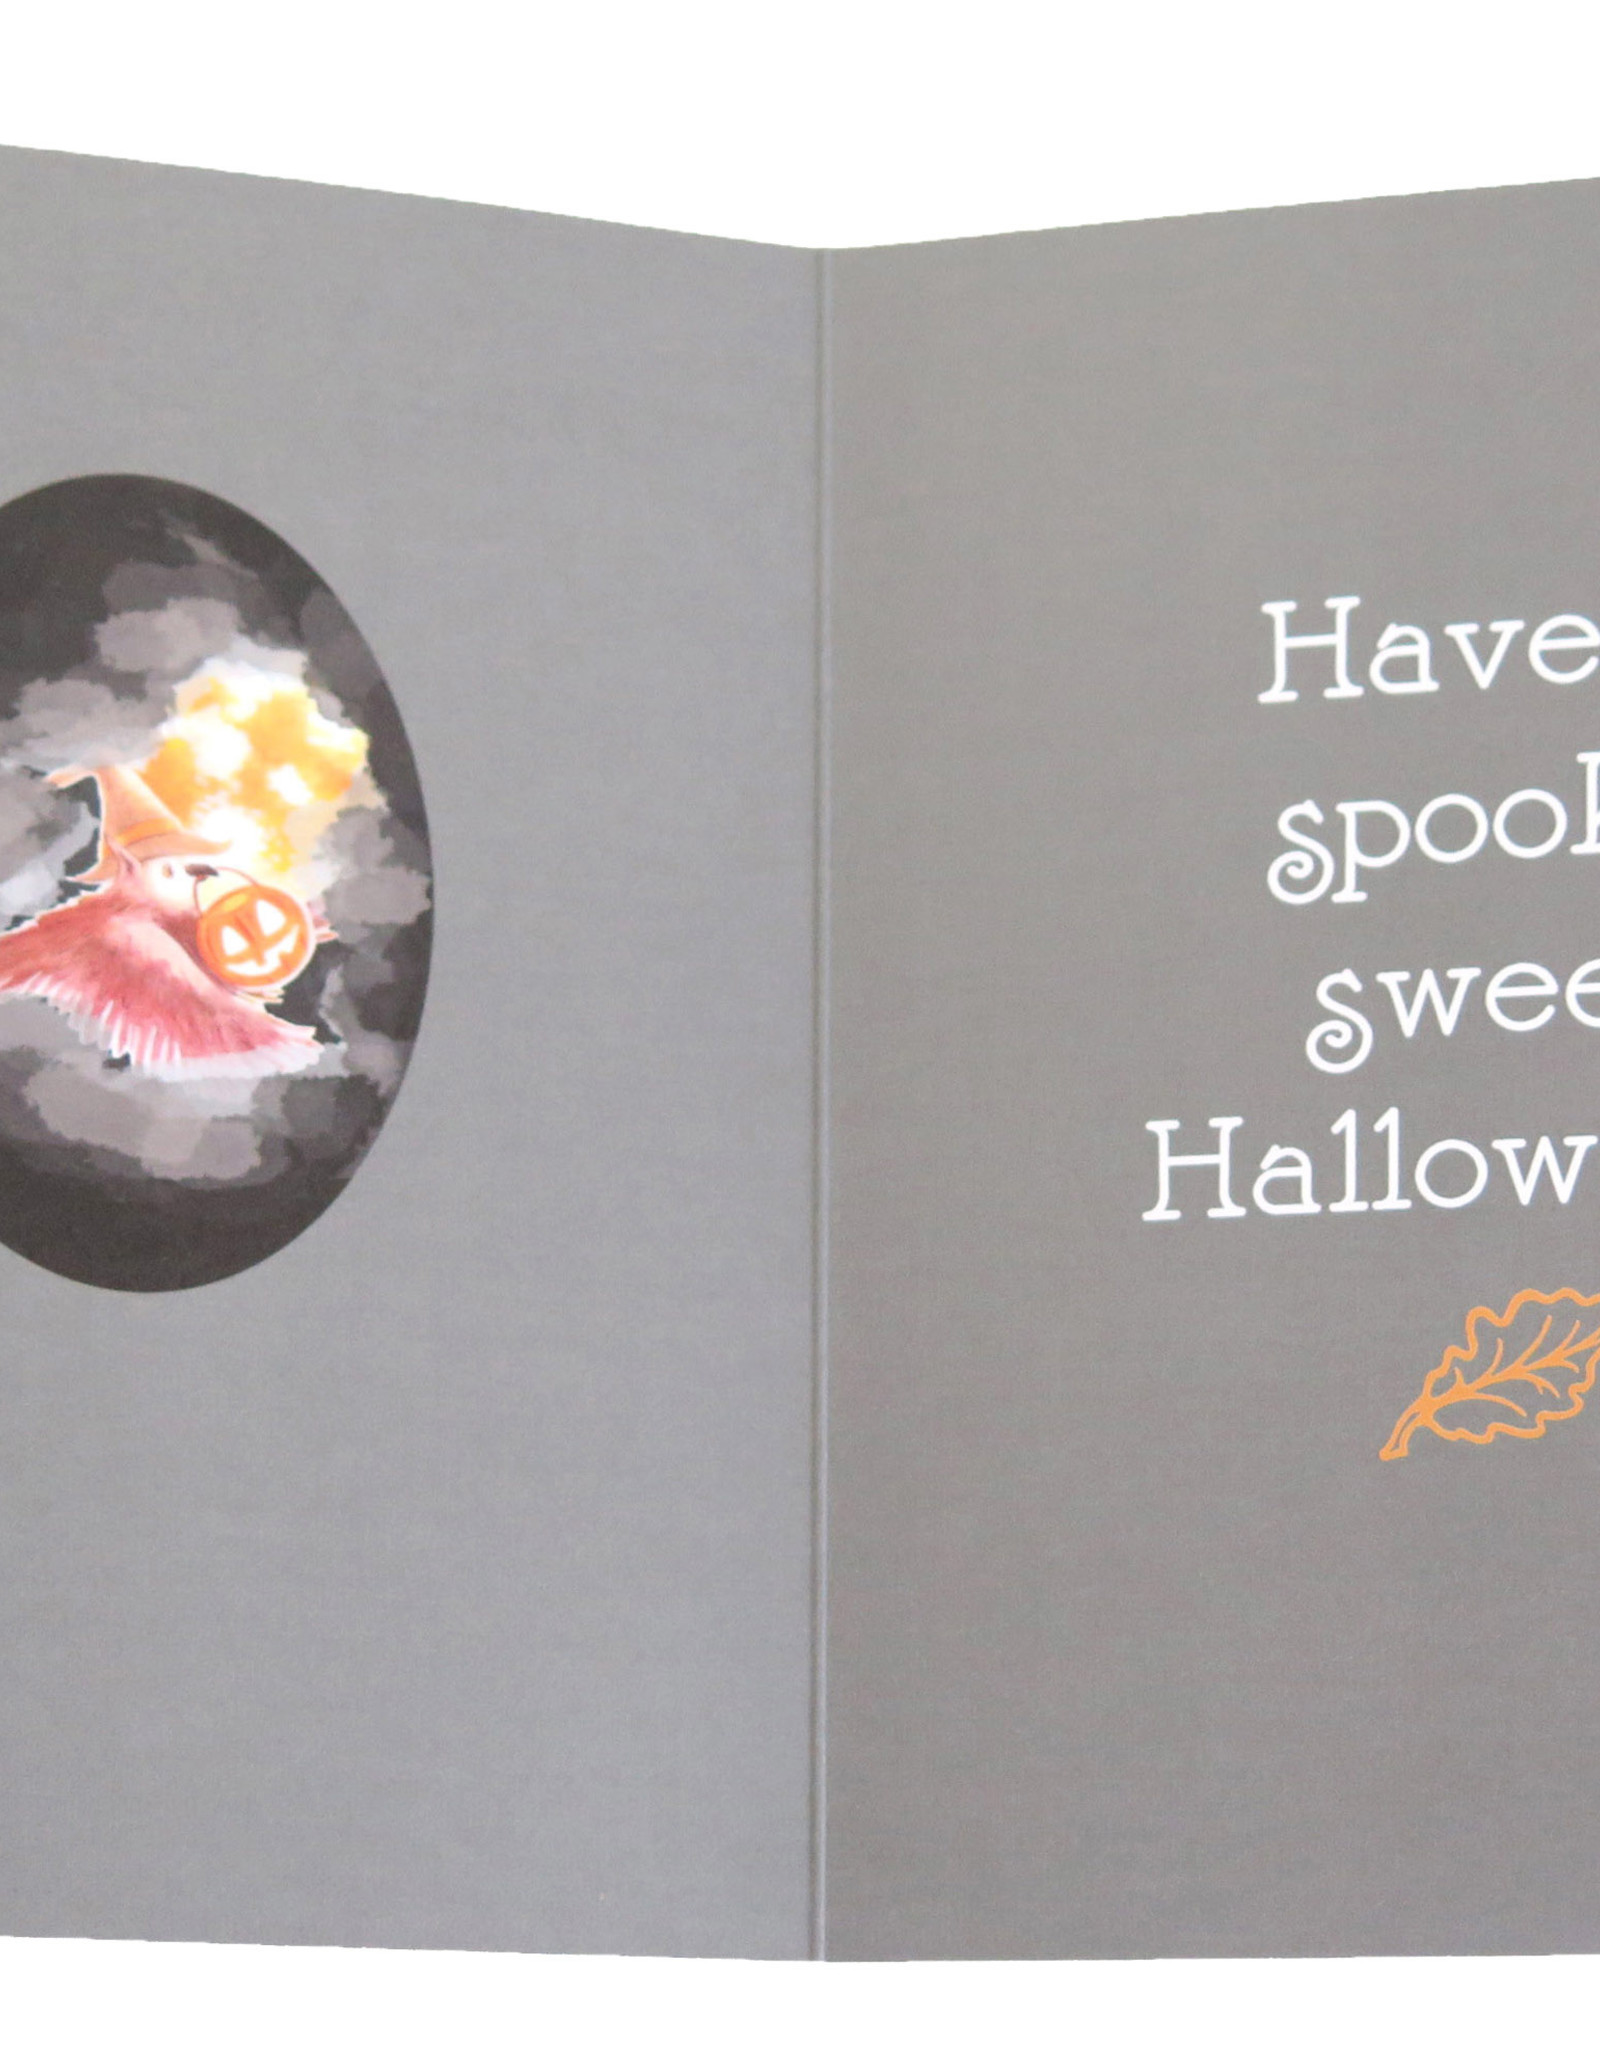 The Island Octopus Halloween Greeting Card with flocking, Melissa Rohr Gindling